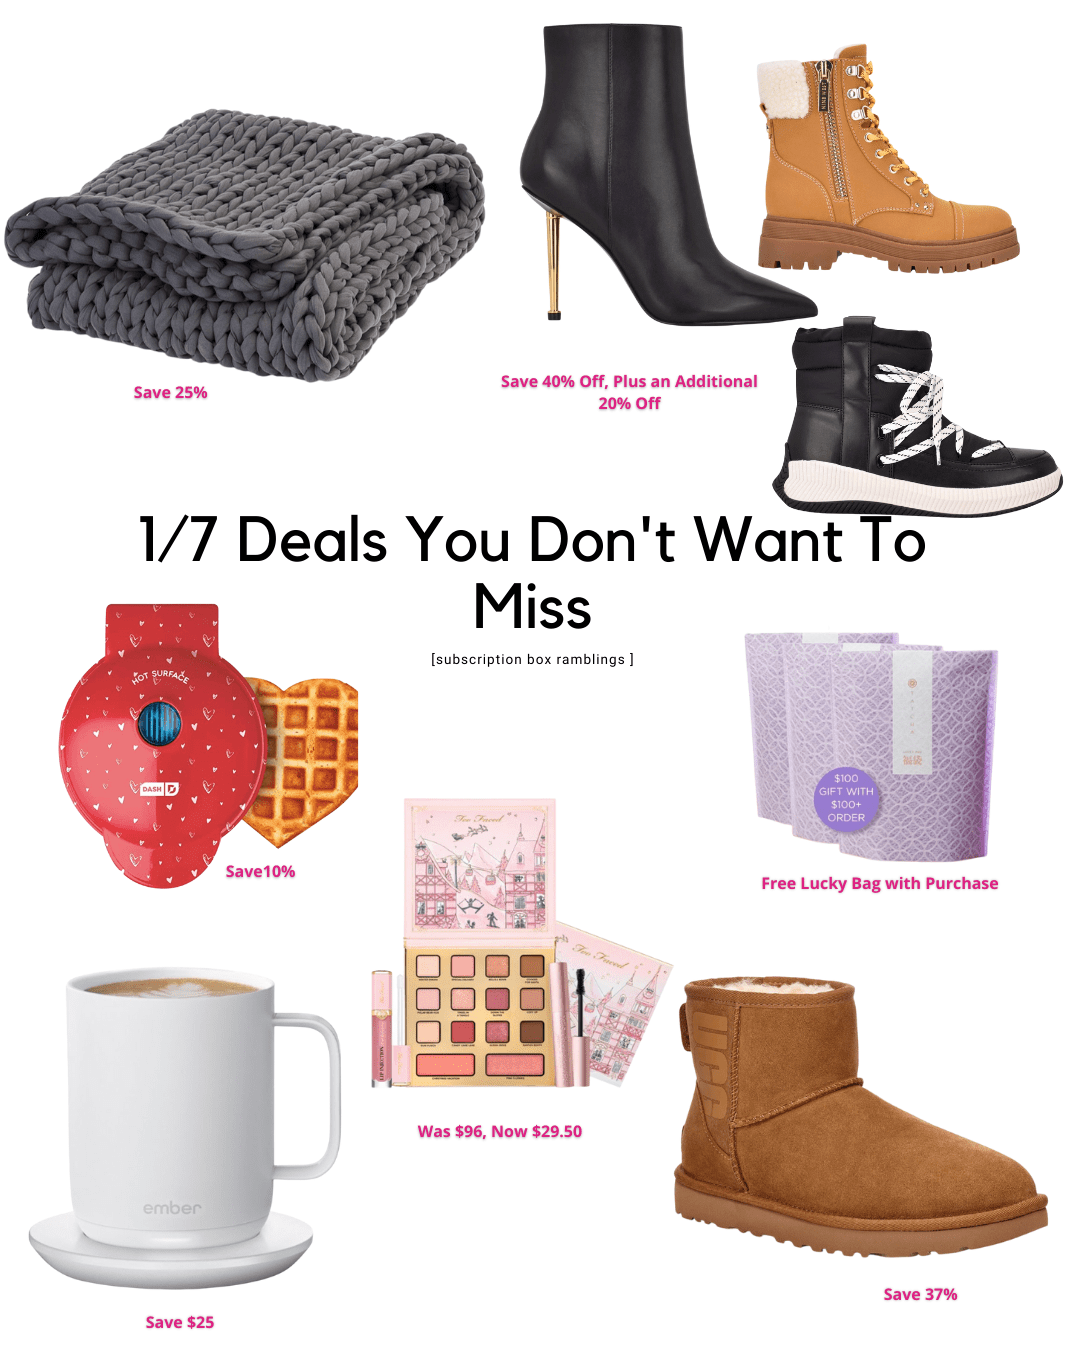 Deals You Don’t Want to Miss – 1/7